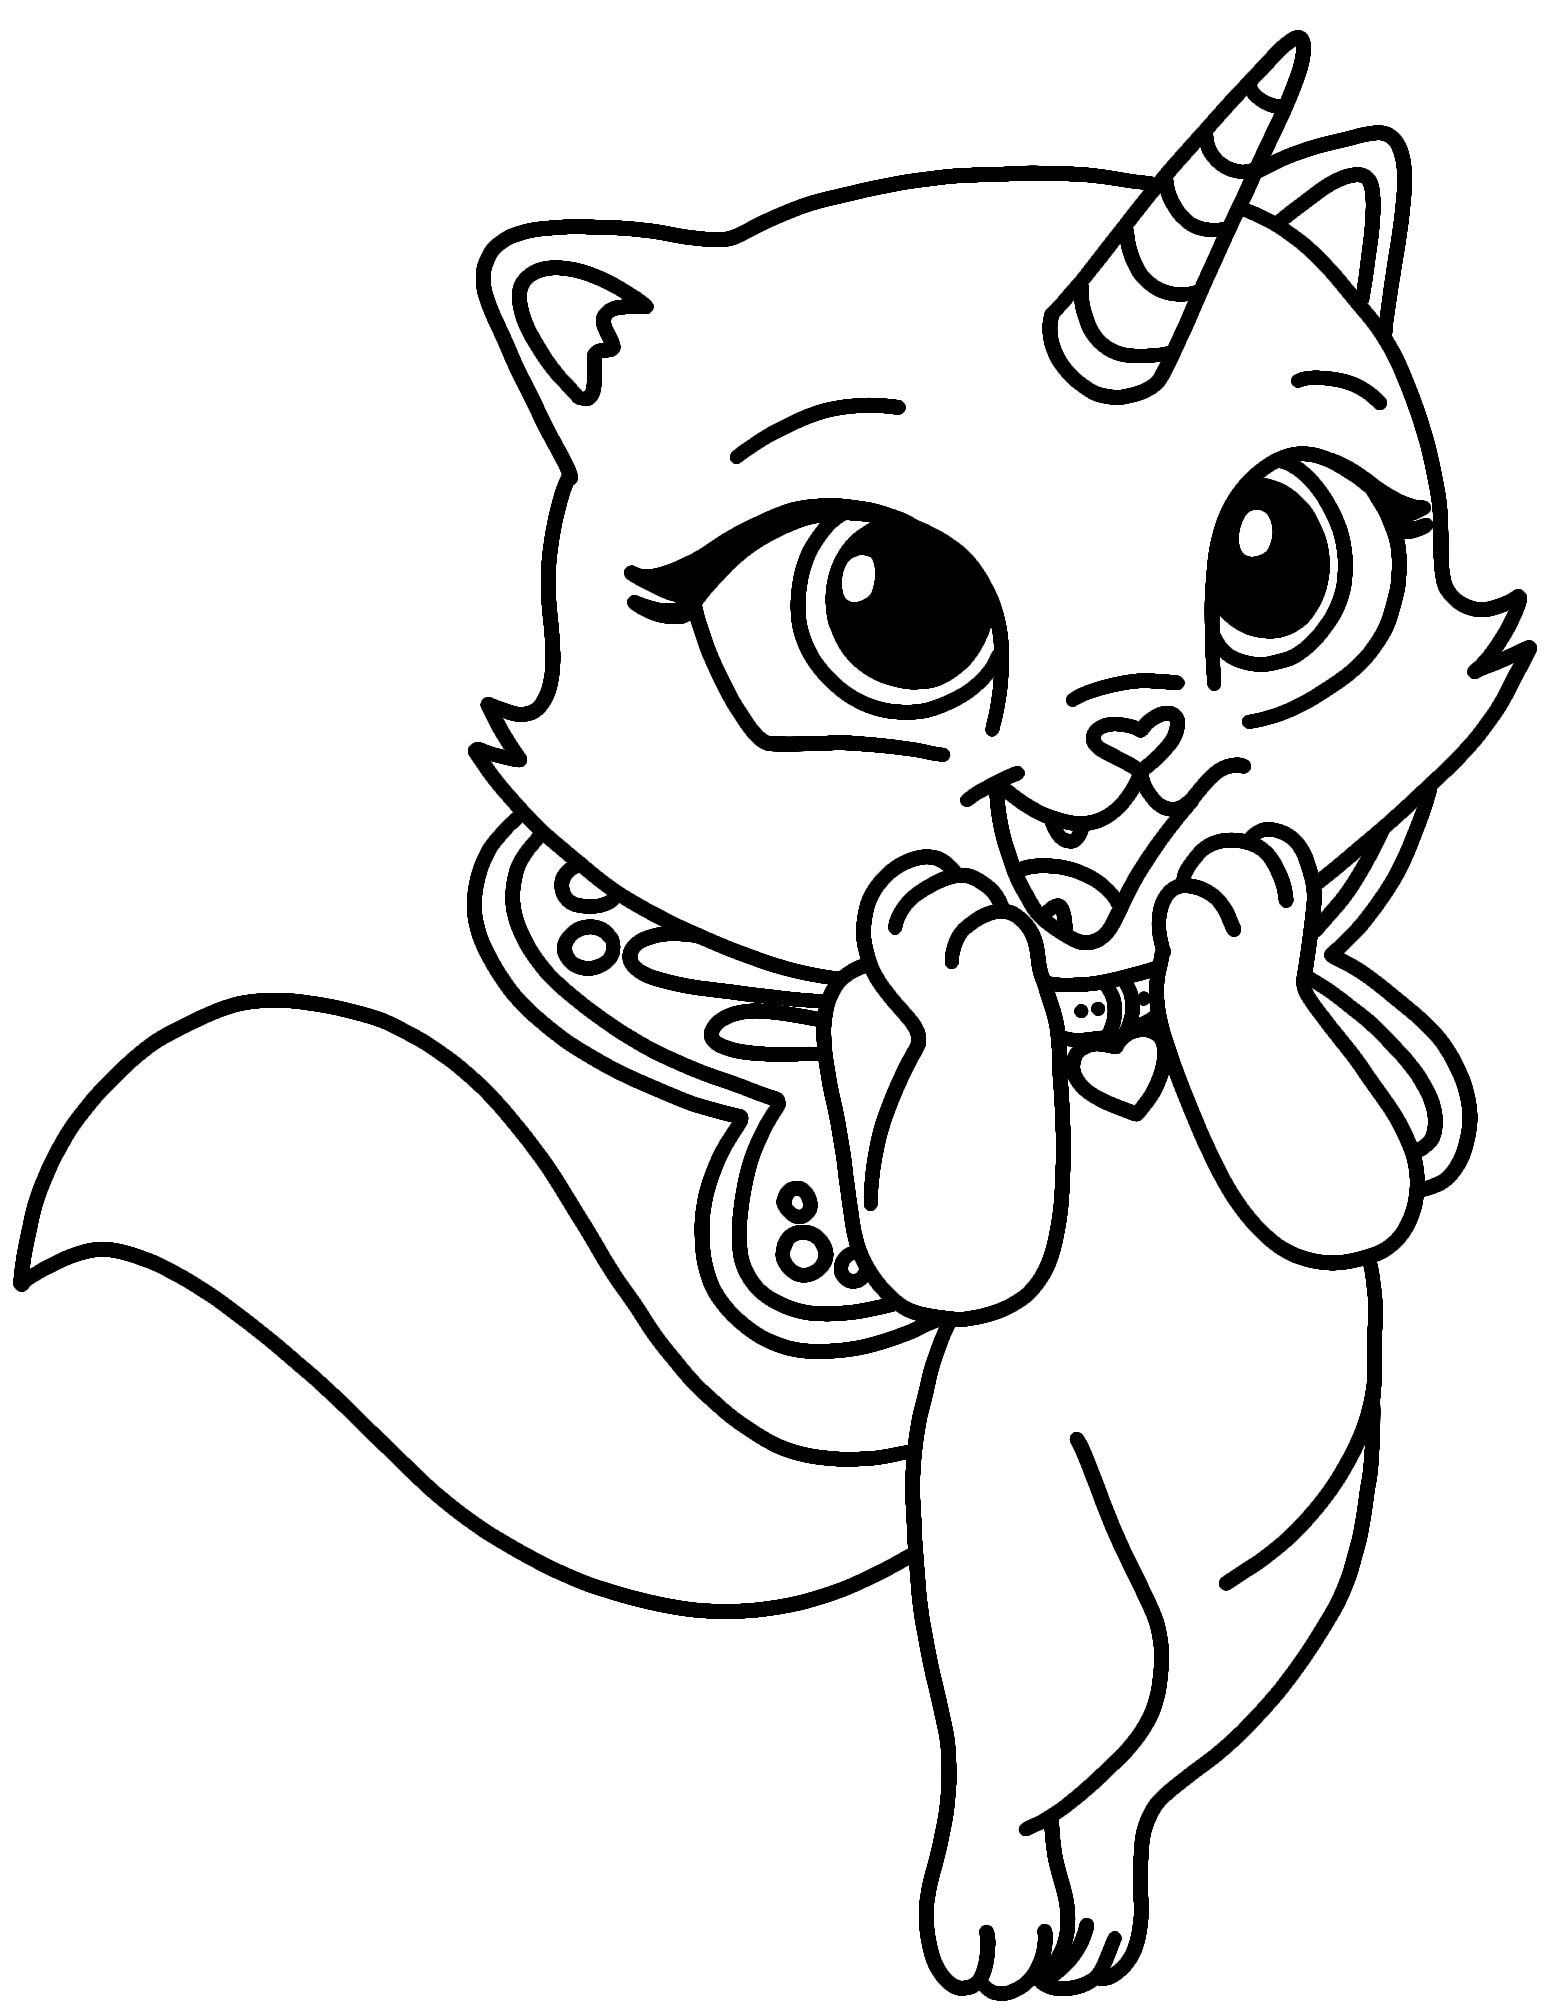 Rainbow butterfly unicorn kitty coloring pages cat coloring book kitty coloring hello kitty colouring pages